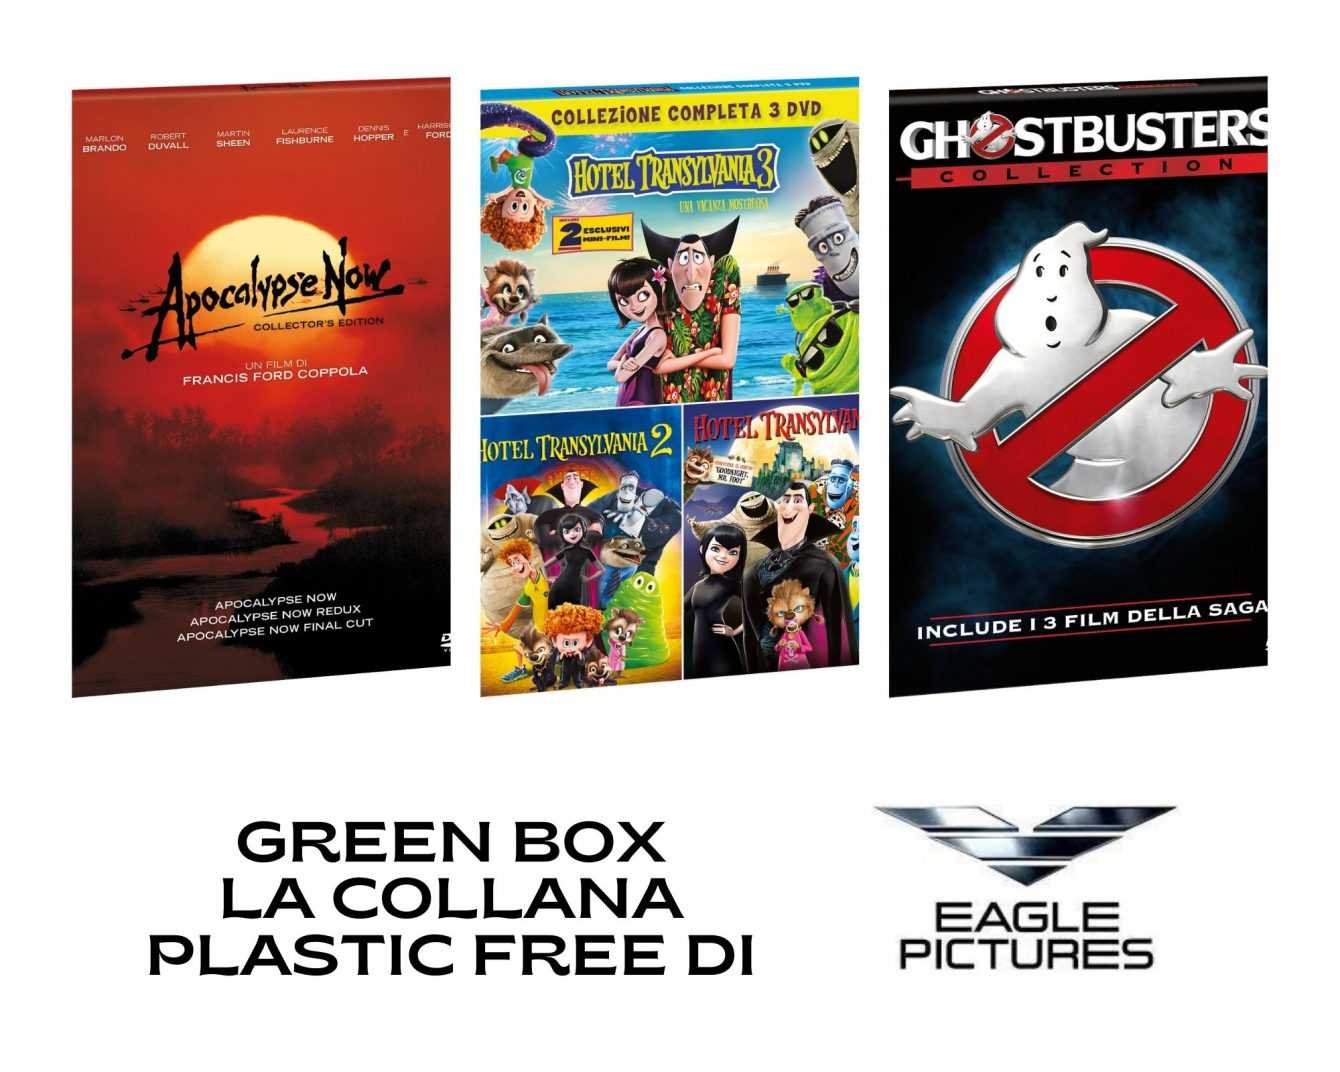 Eagle Pictures launches the new Home Video GREEN series with plastic free packaging